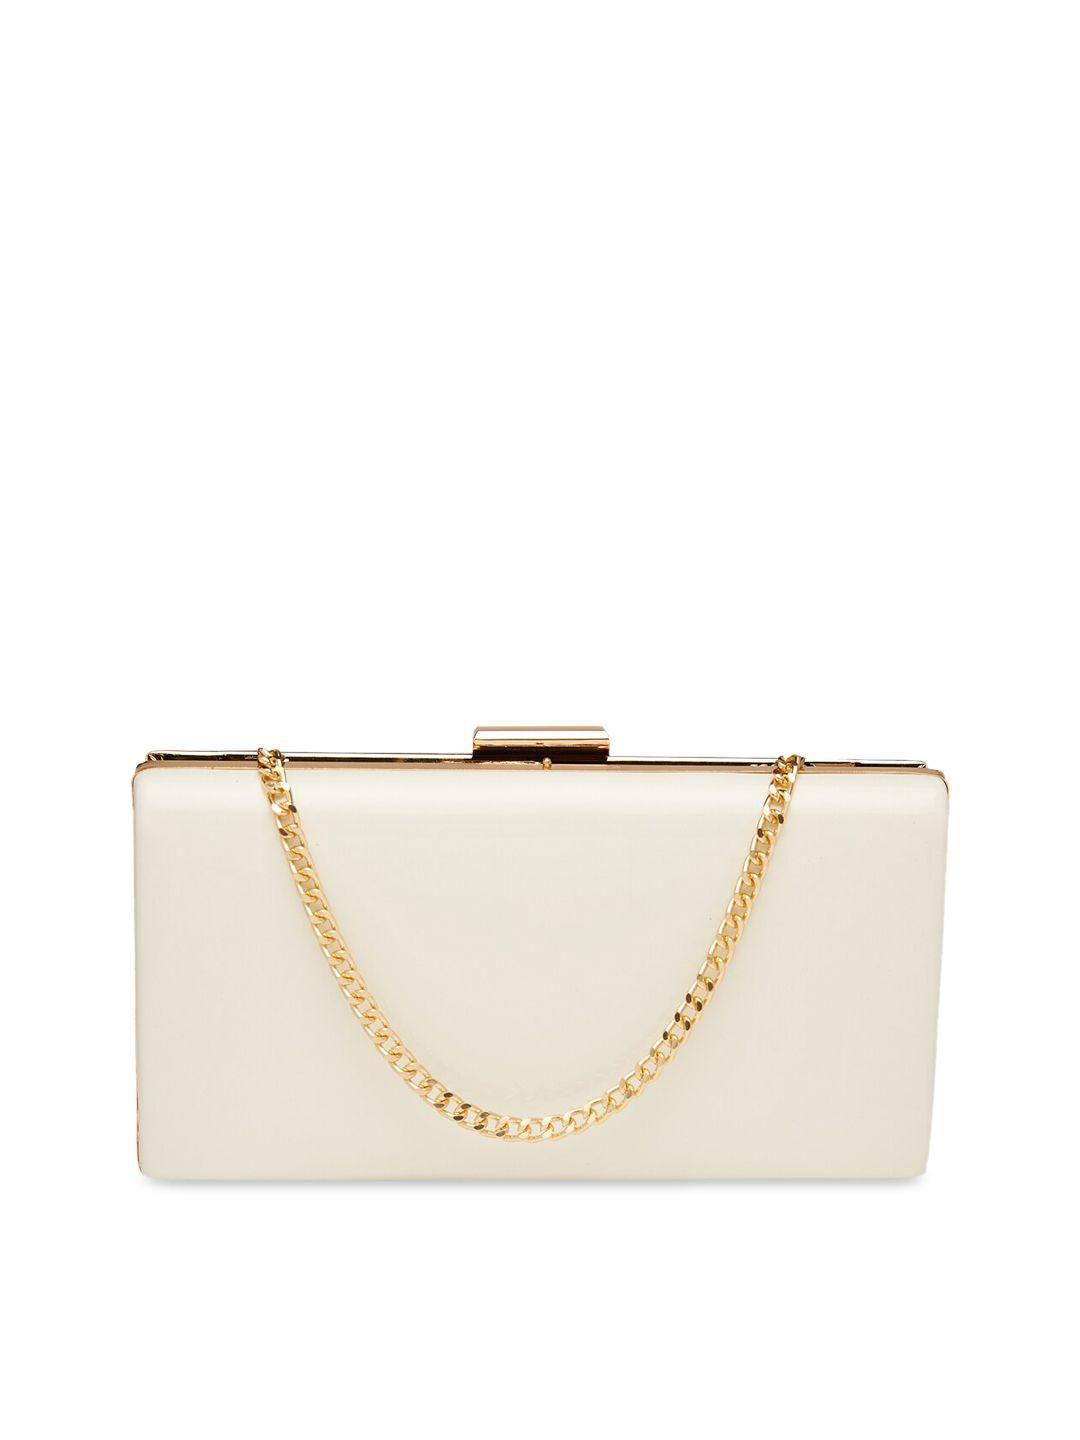 vdesi white solid box clutch